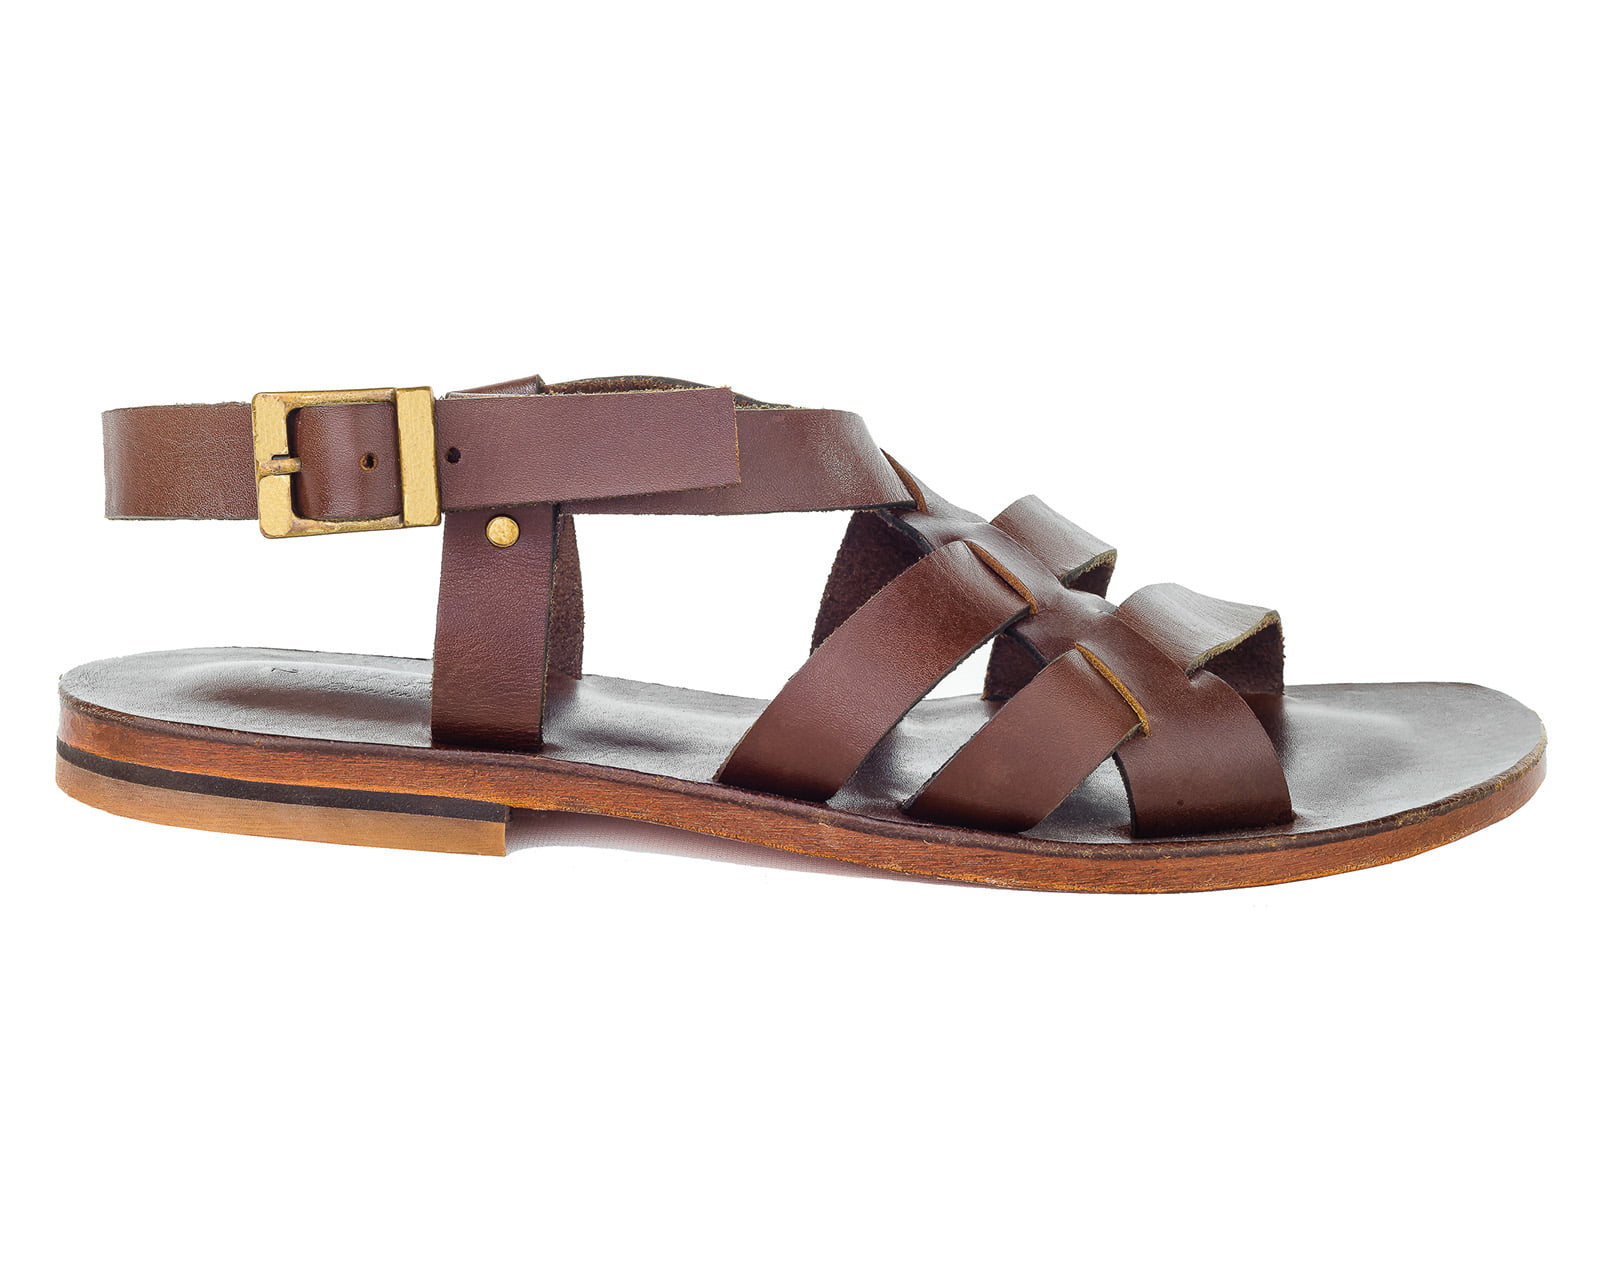 Heracles Ancient Sandals - MARNU